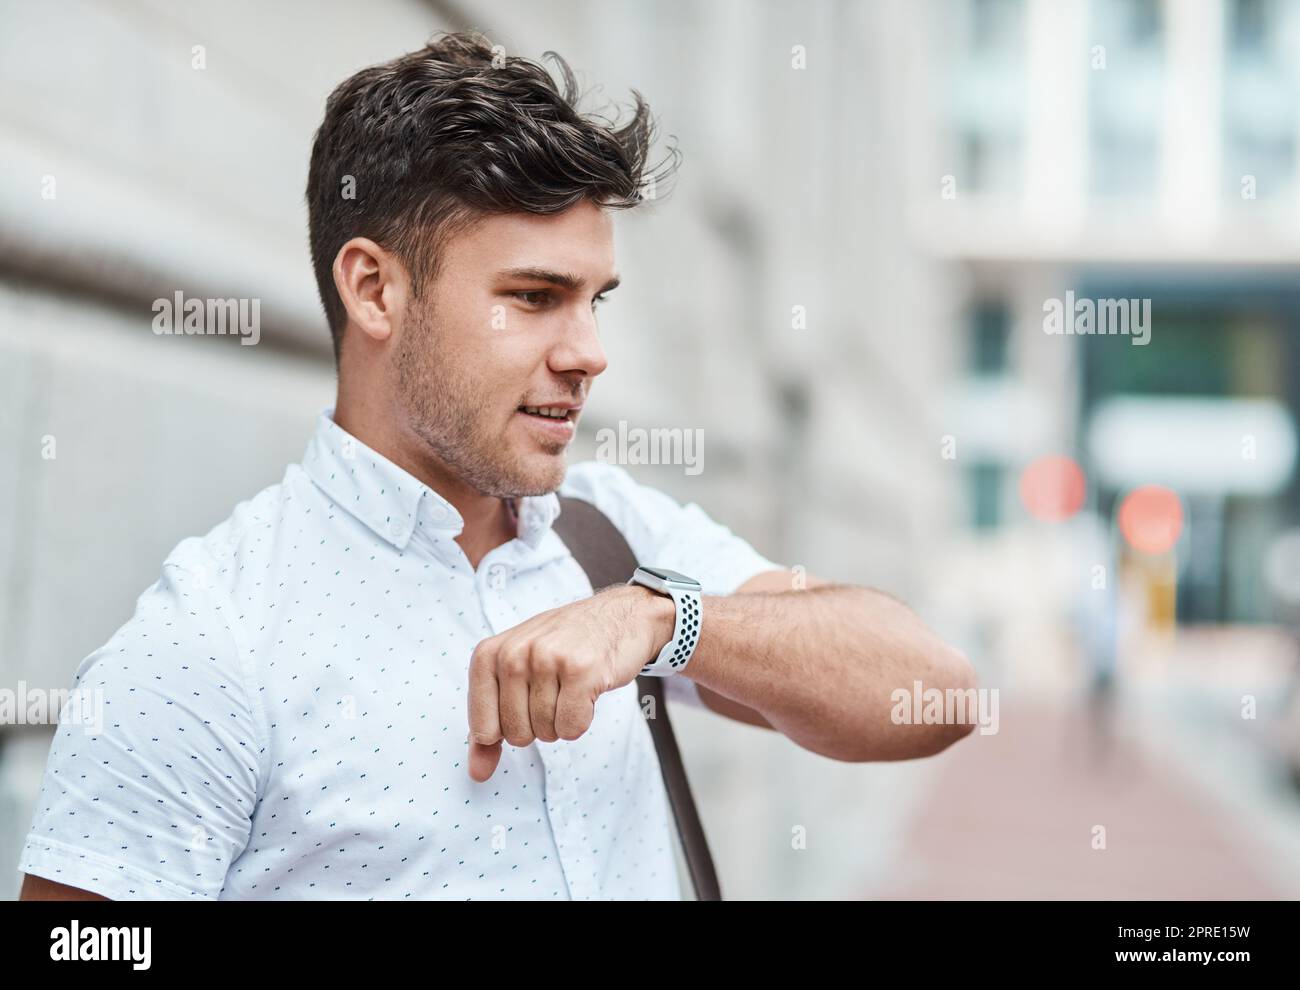 Chatting on a smartwatch with a young creative business man or intern commuting in the city. Hailing a cab, taxi or ride with an app on wireless technology. Male employee travelling to and from work Stock Photo